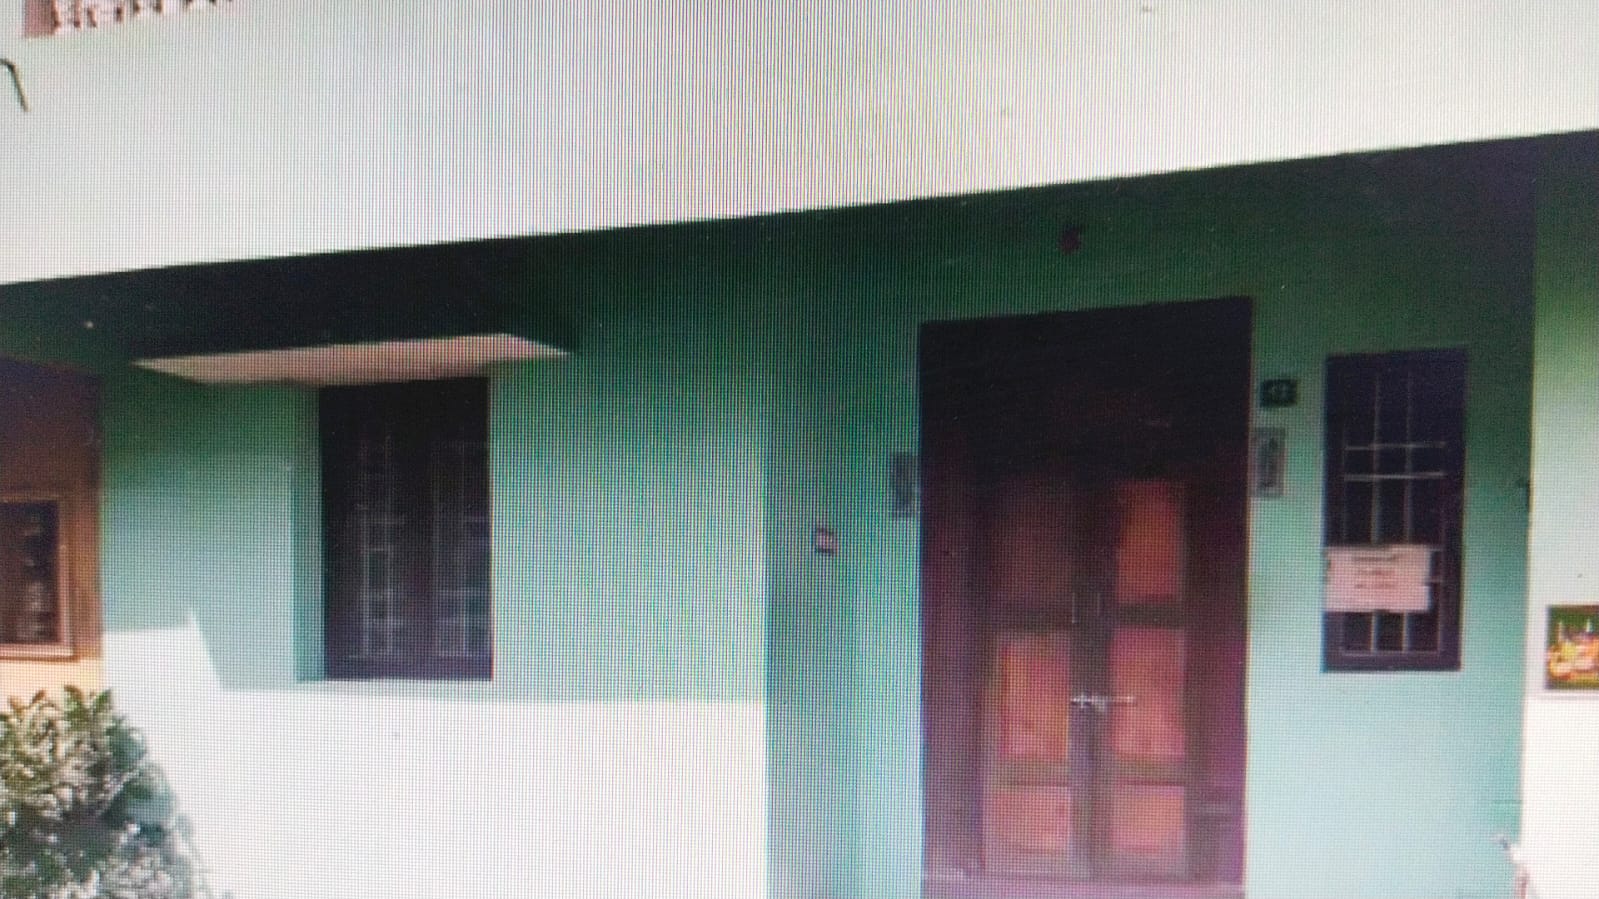 9709-for-sale-3BHK-Residential-Independent House-Rs-4500000-in-Pondicherry-Town-Pondicherry-City-Puducherry